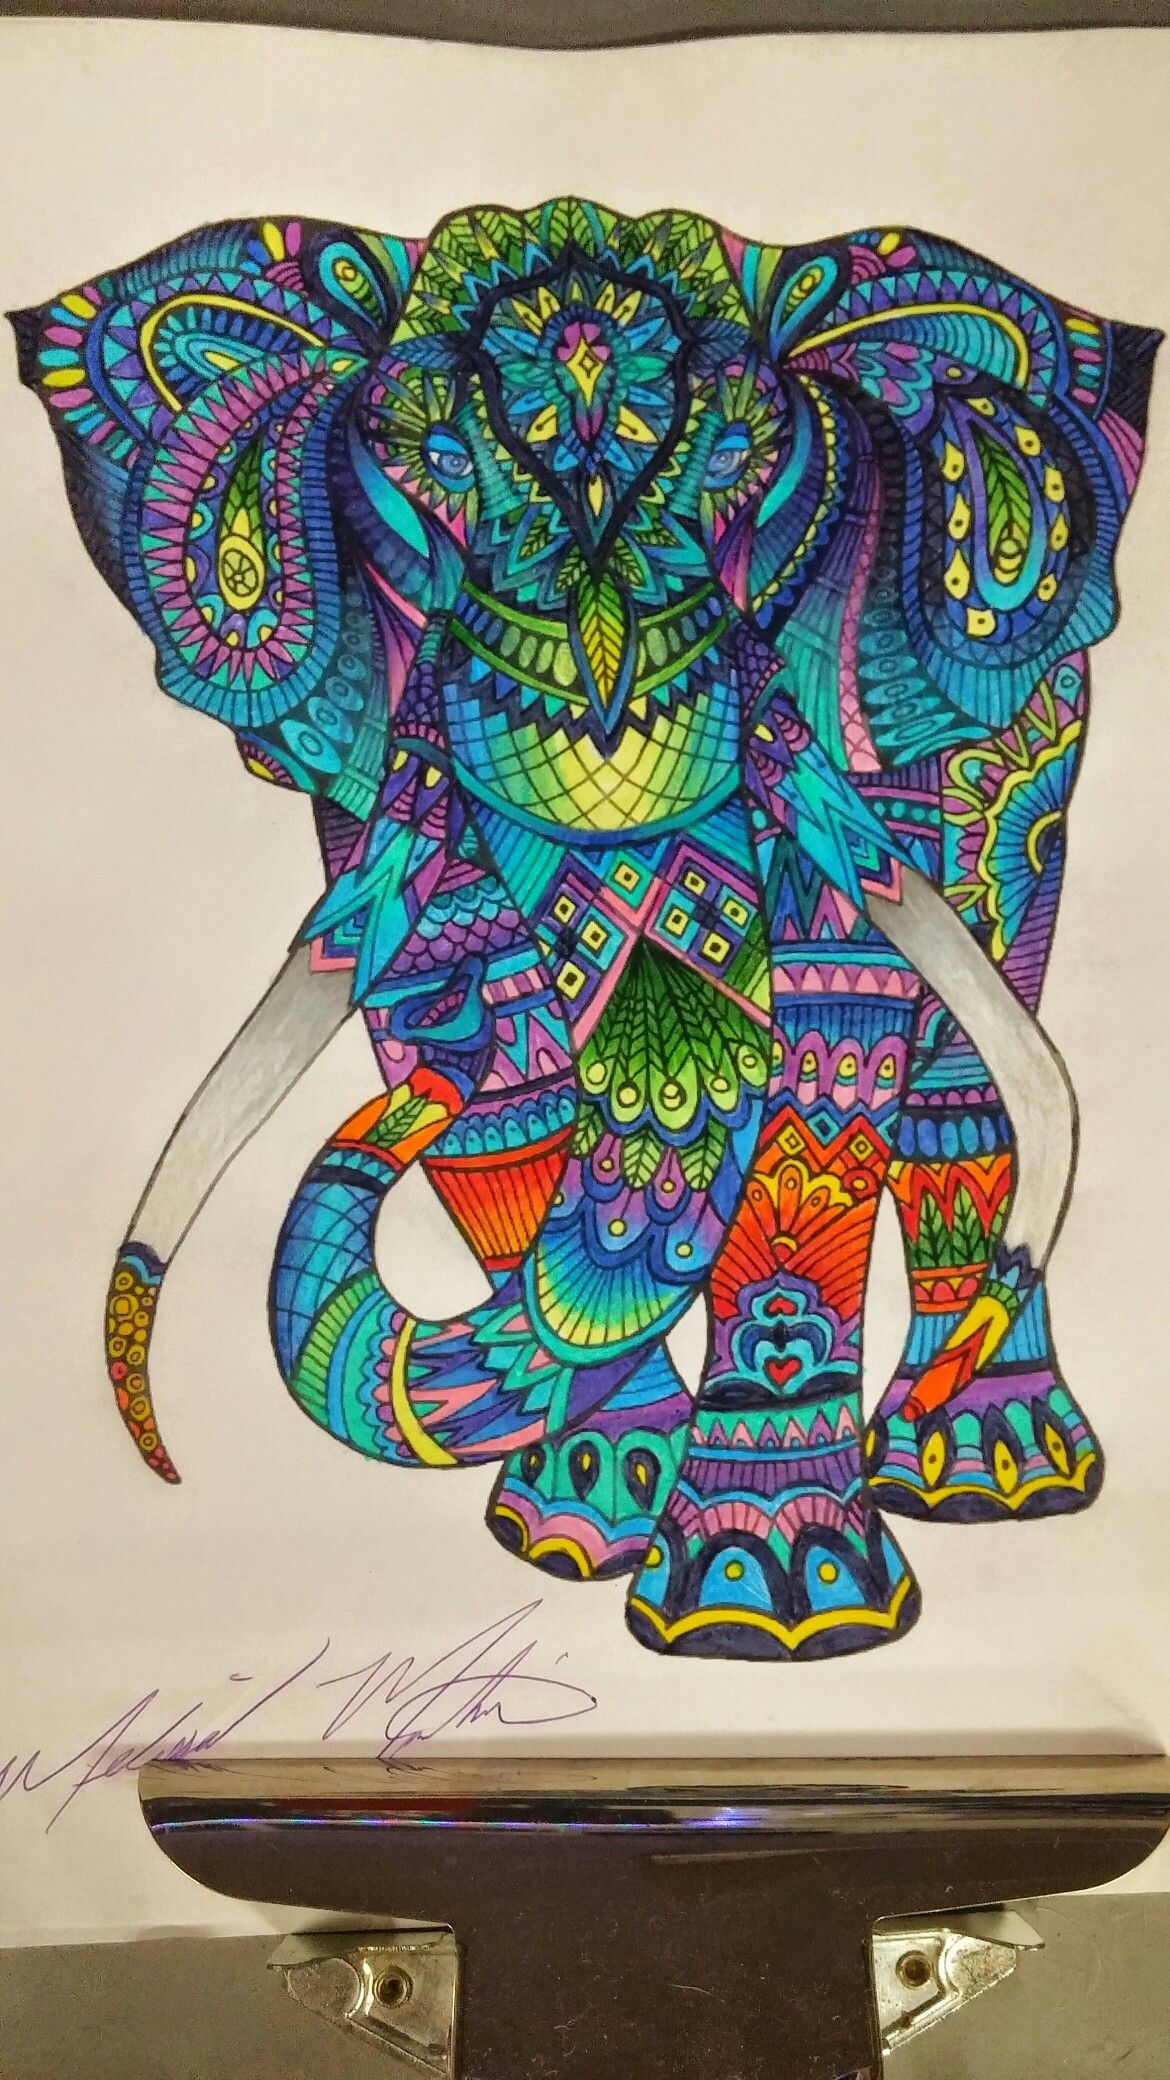 Adult coloring colorful colored pencils prisma pleted finished elephant beaâ elephant coloring page adult coloring inspiration adult coloring animals